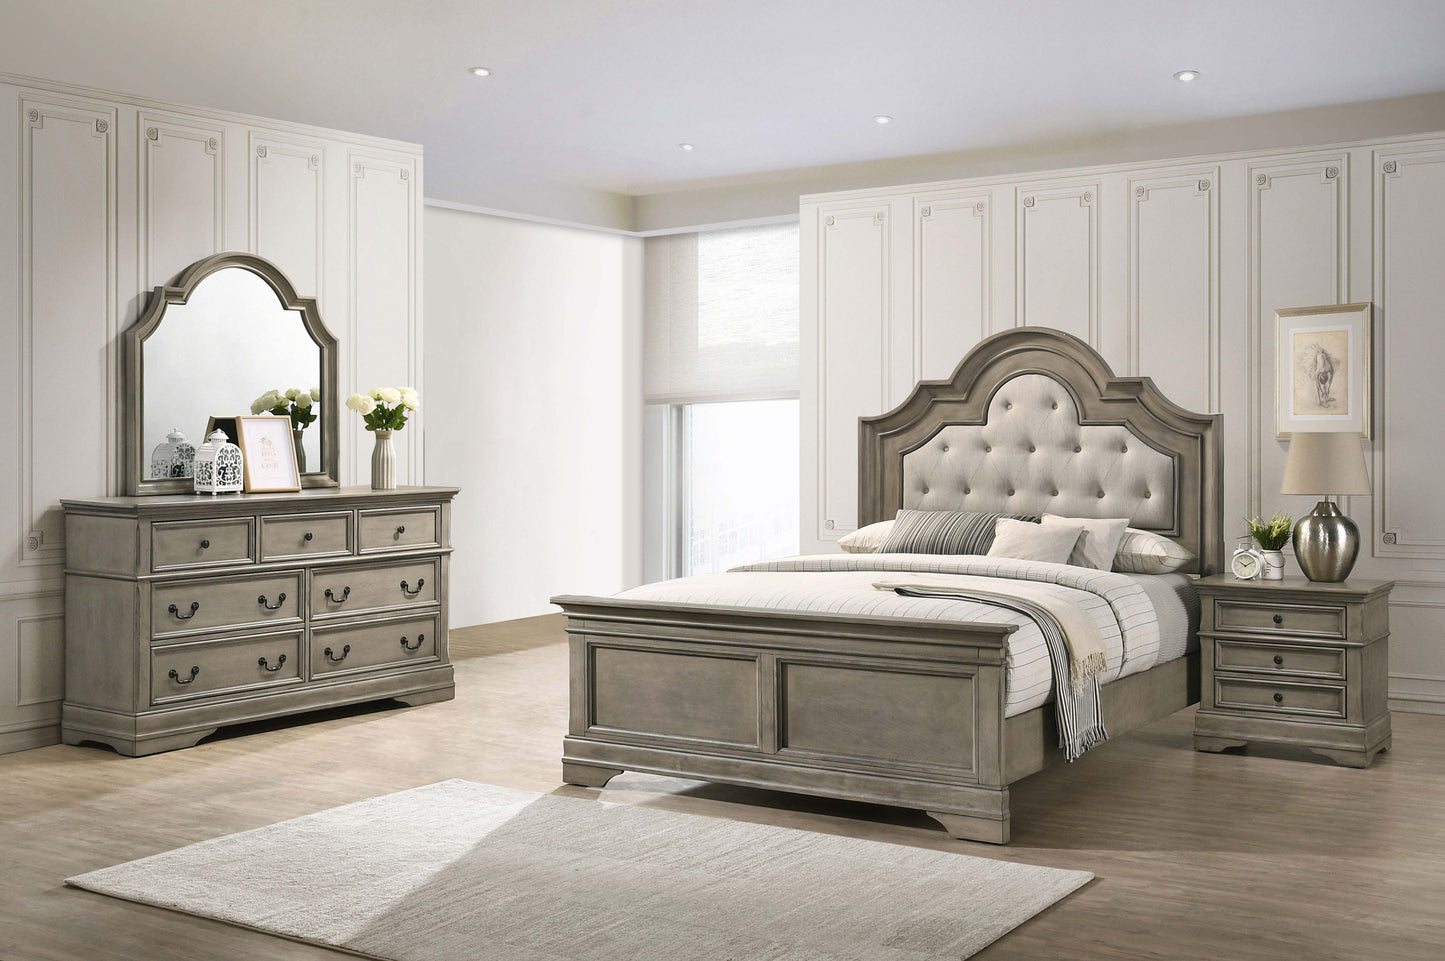 Manchester 4-piece Eastern King Bedroom Set Wheat Brown